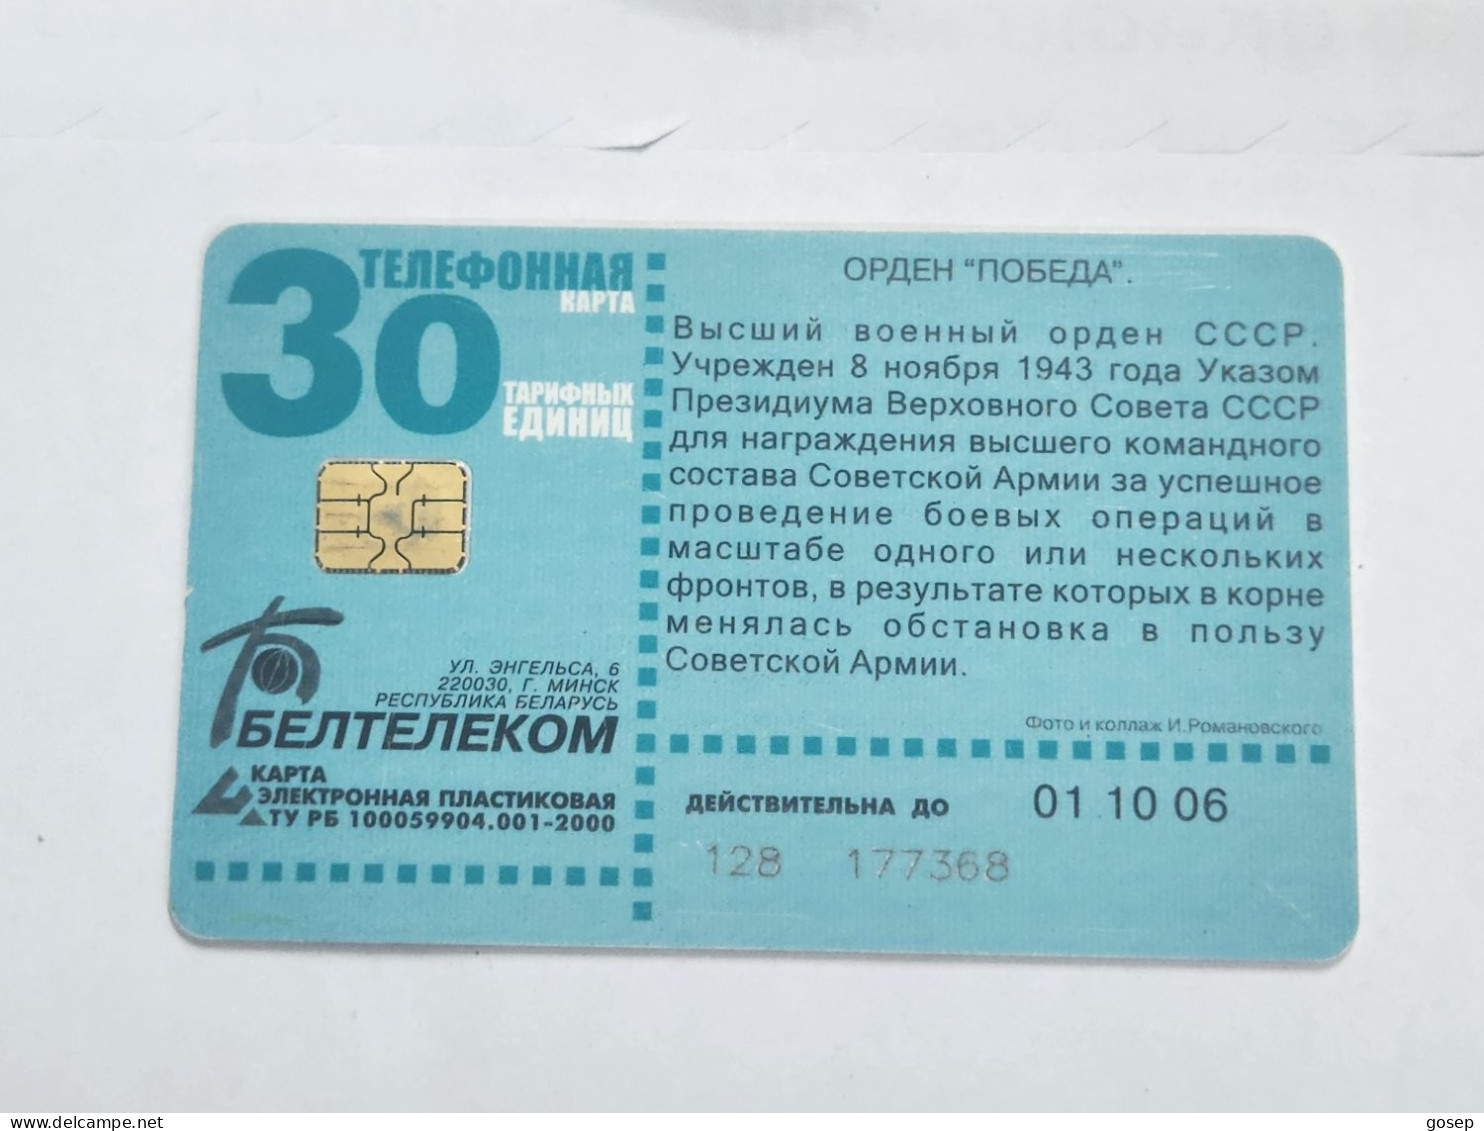 BELARUS-(BY-BLT-128a)-60th Anniversary Victoria-(111)(GOLD CHIP)(177368)(tirage-188.000)used Card+1card Prepiad Free - Bielorussia